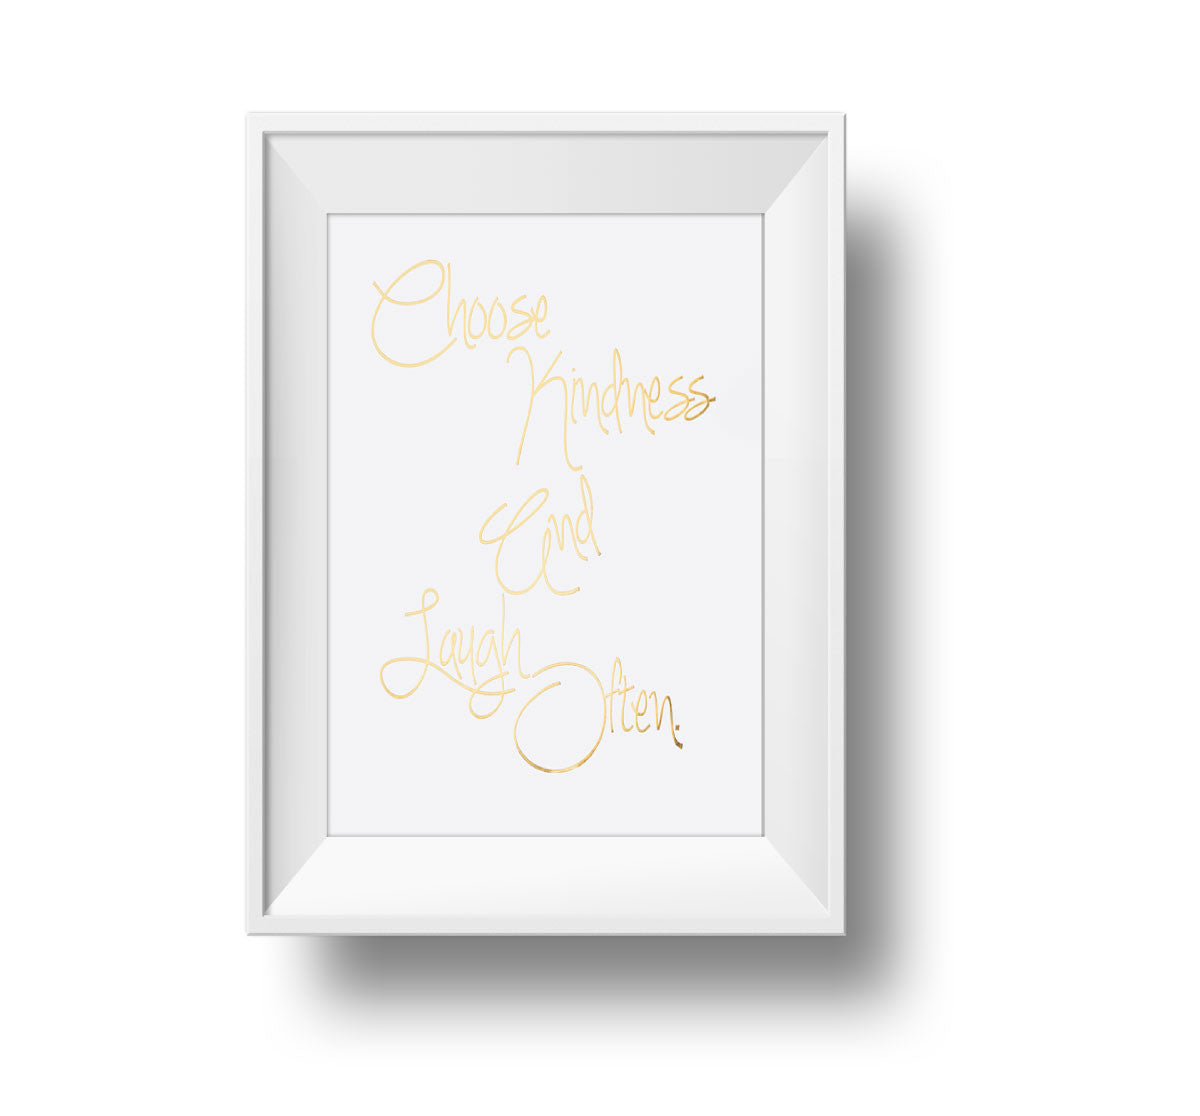 Gold foil on white paper Choose Kindness And Laugh Often. 11x14 inch typography print. Frame not included.